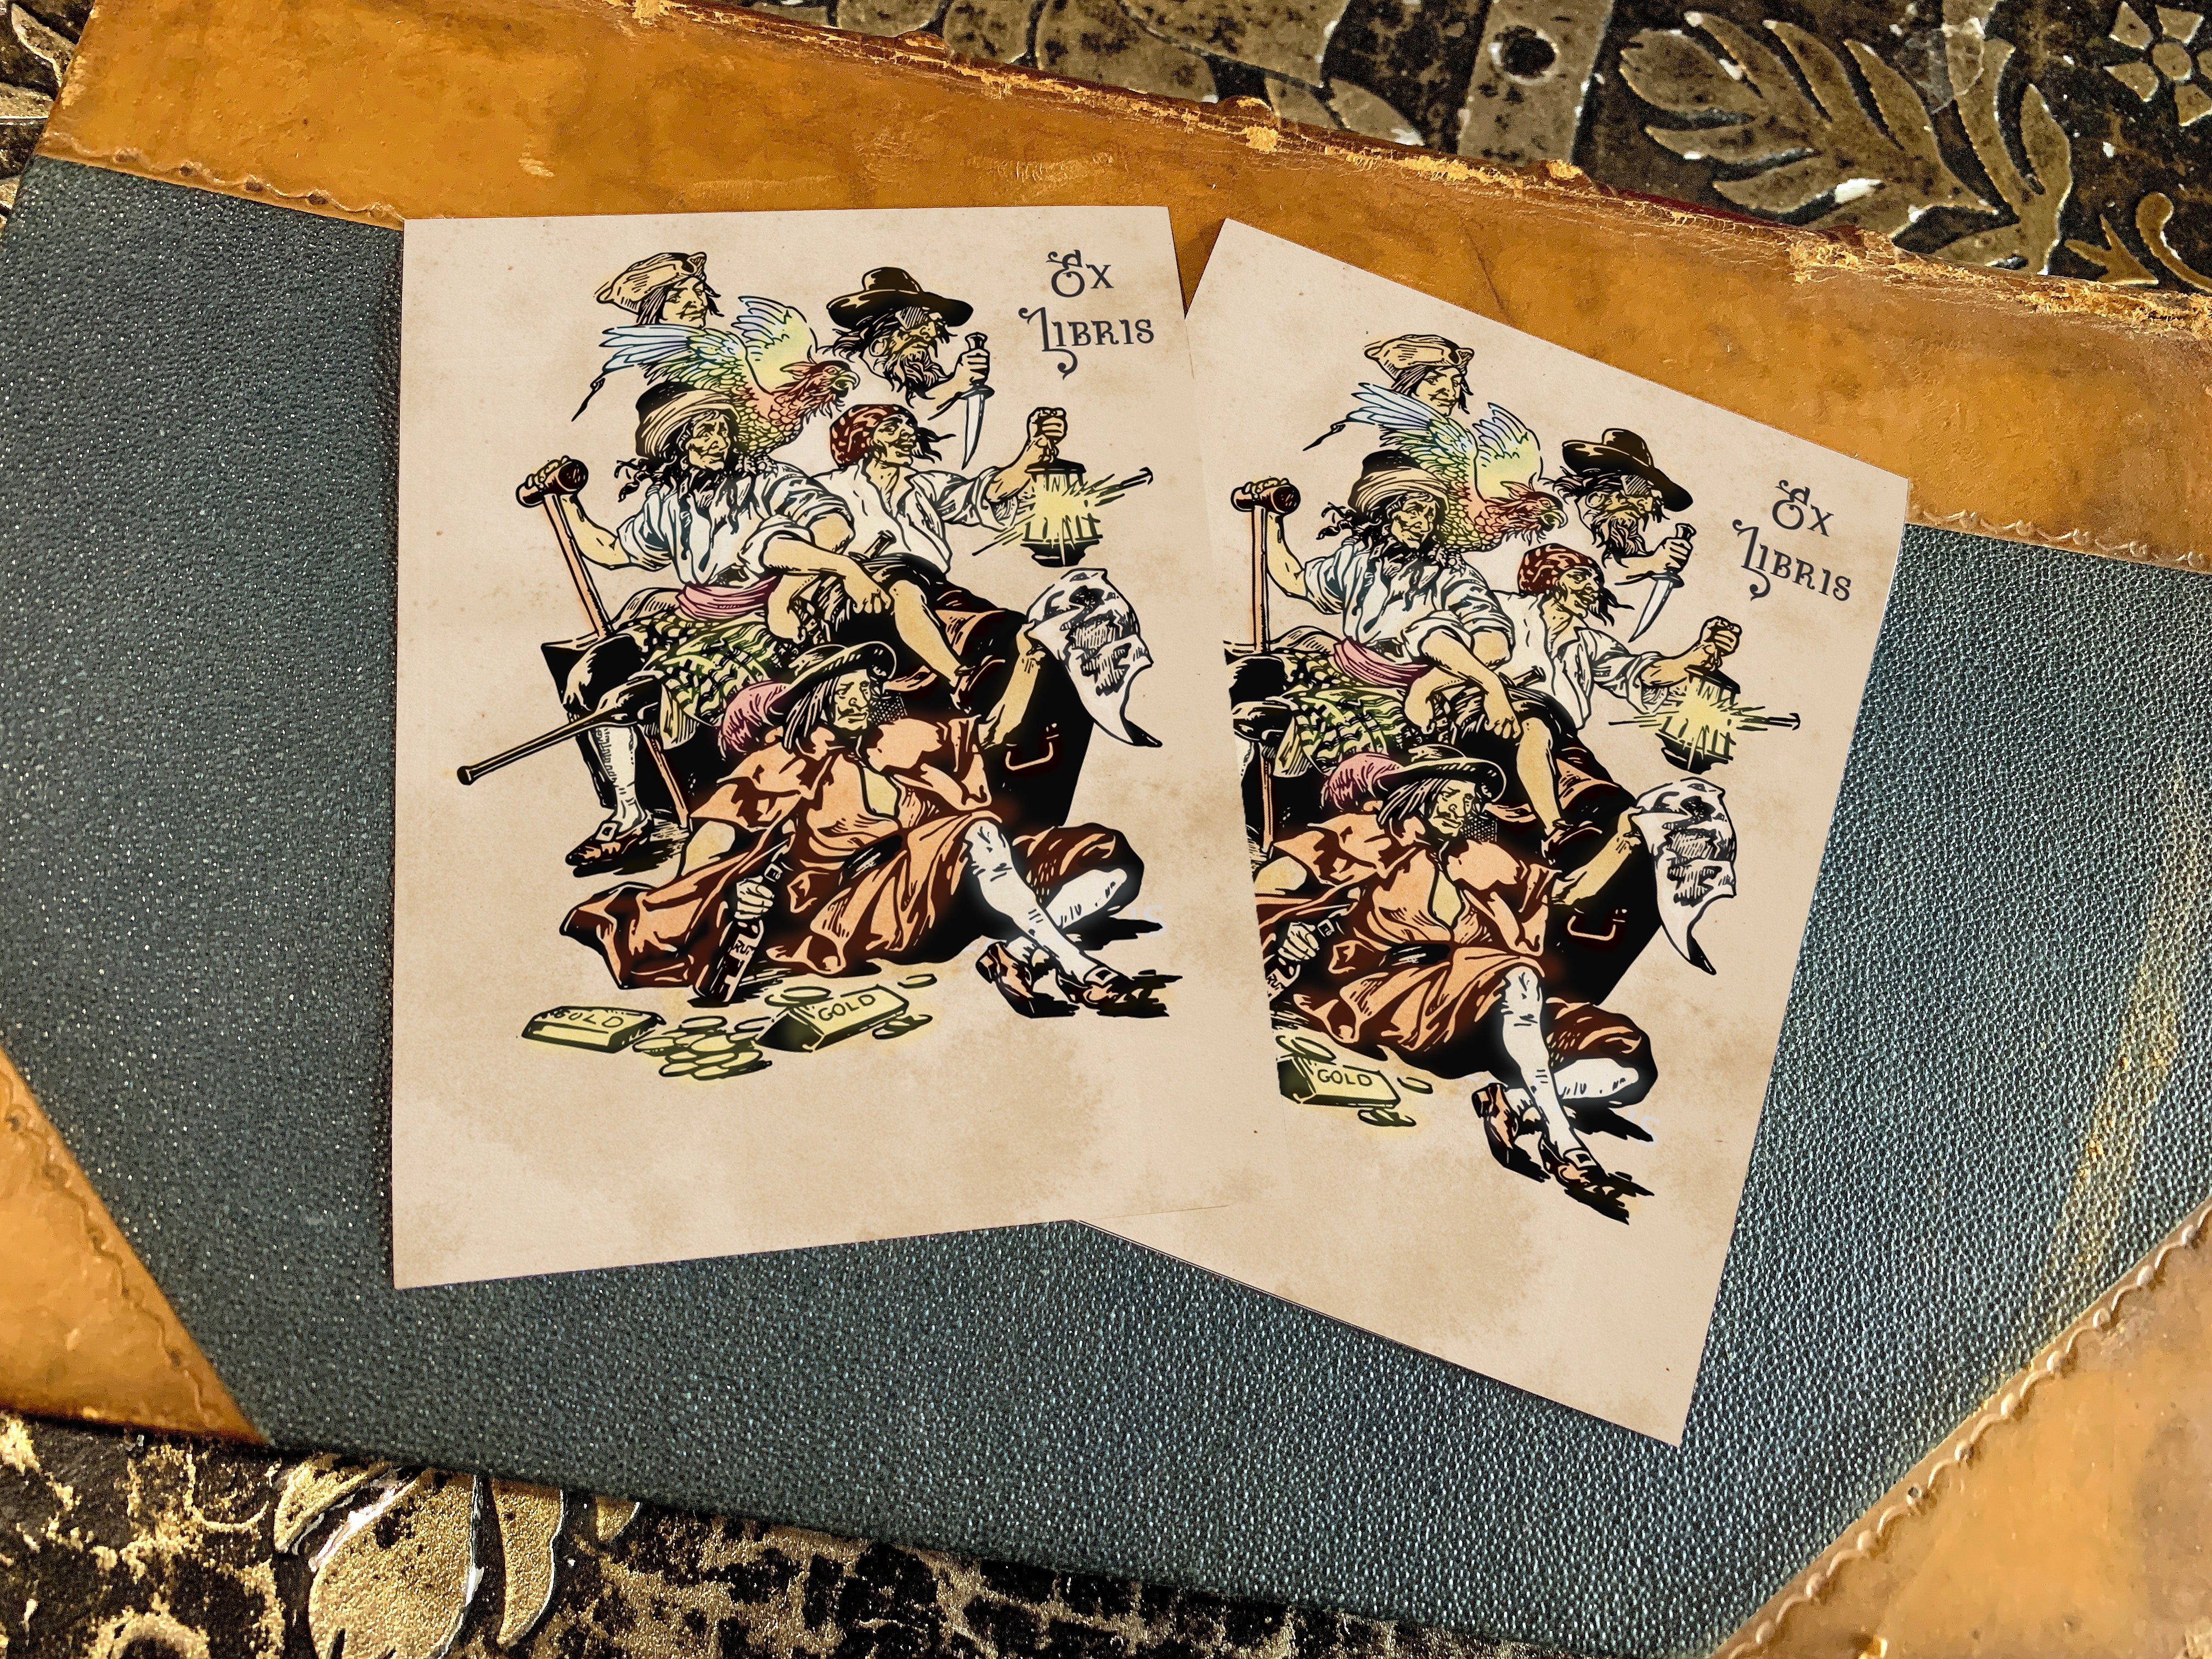 Treasure Island Buccaneers, Personalized Pirate Ex-Libris Bookplates, Crafted on Traditional Gummed Paper, 3in x 4in, Set of 30